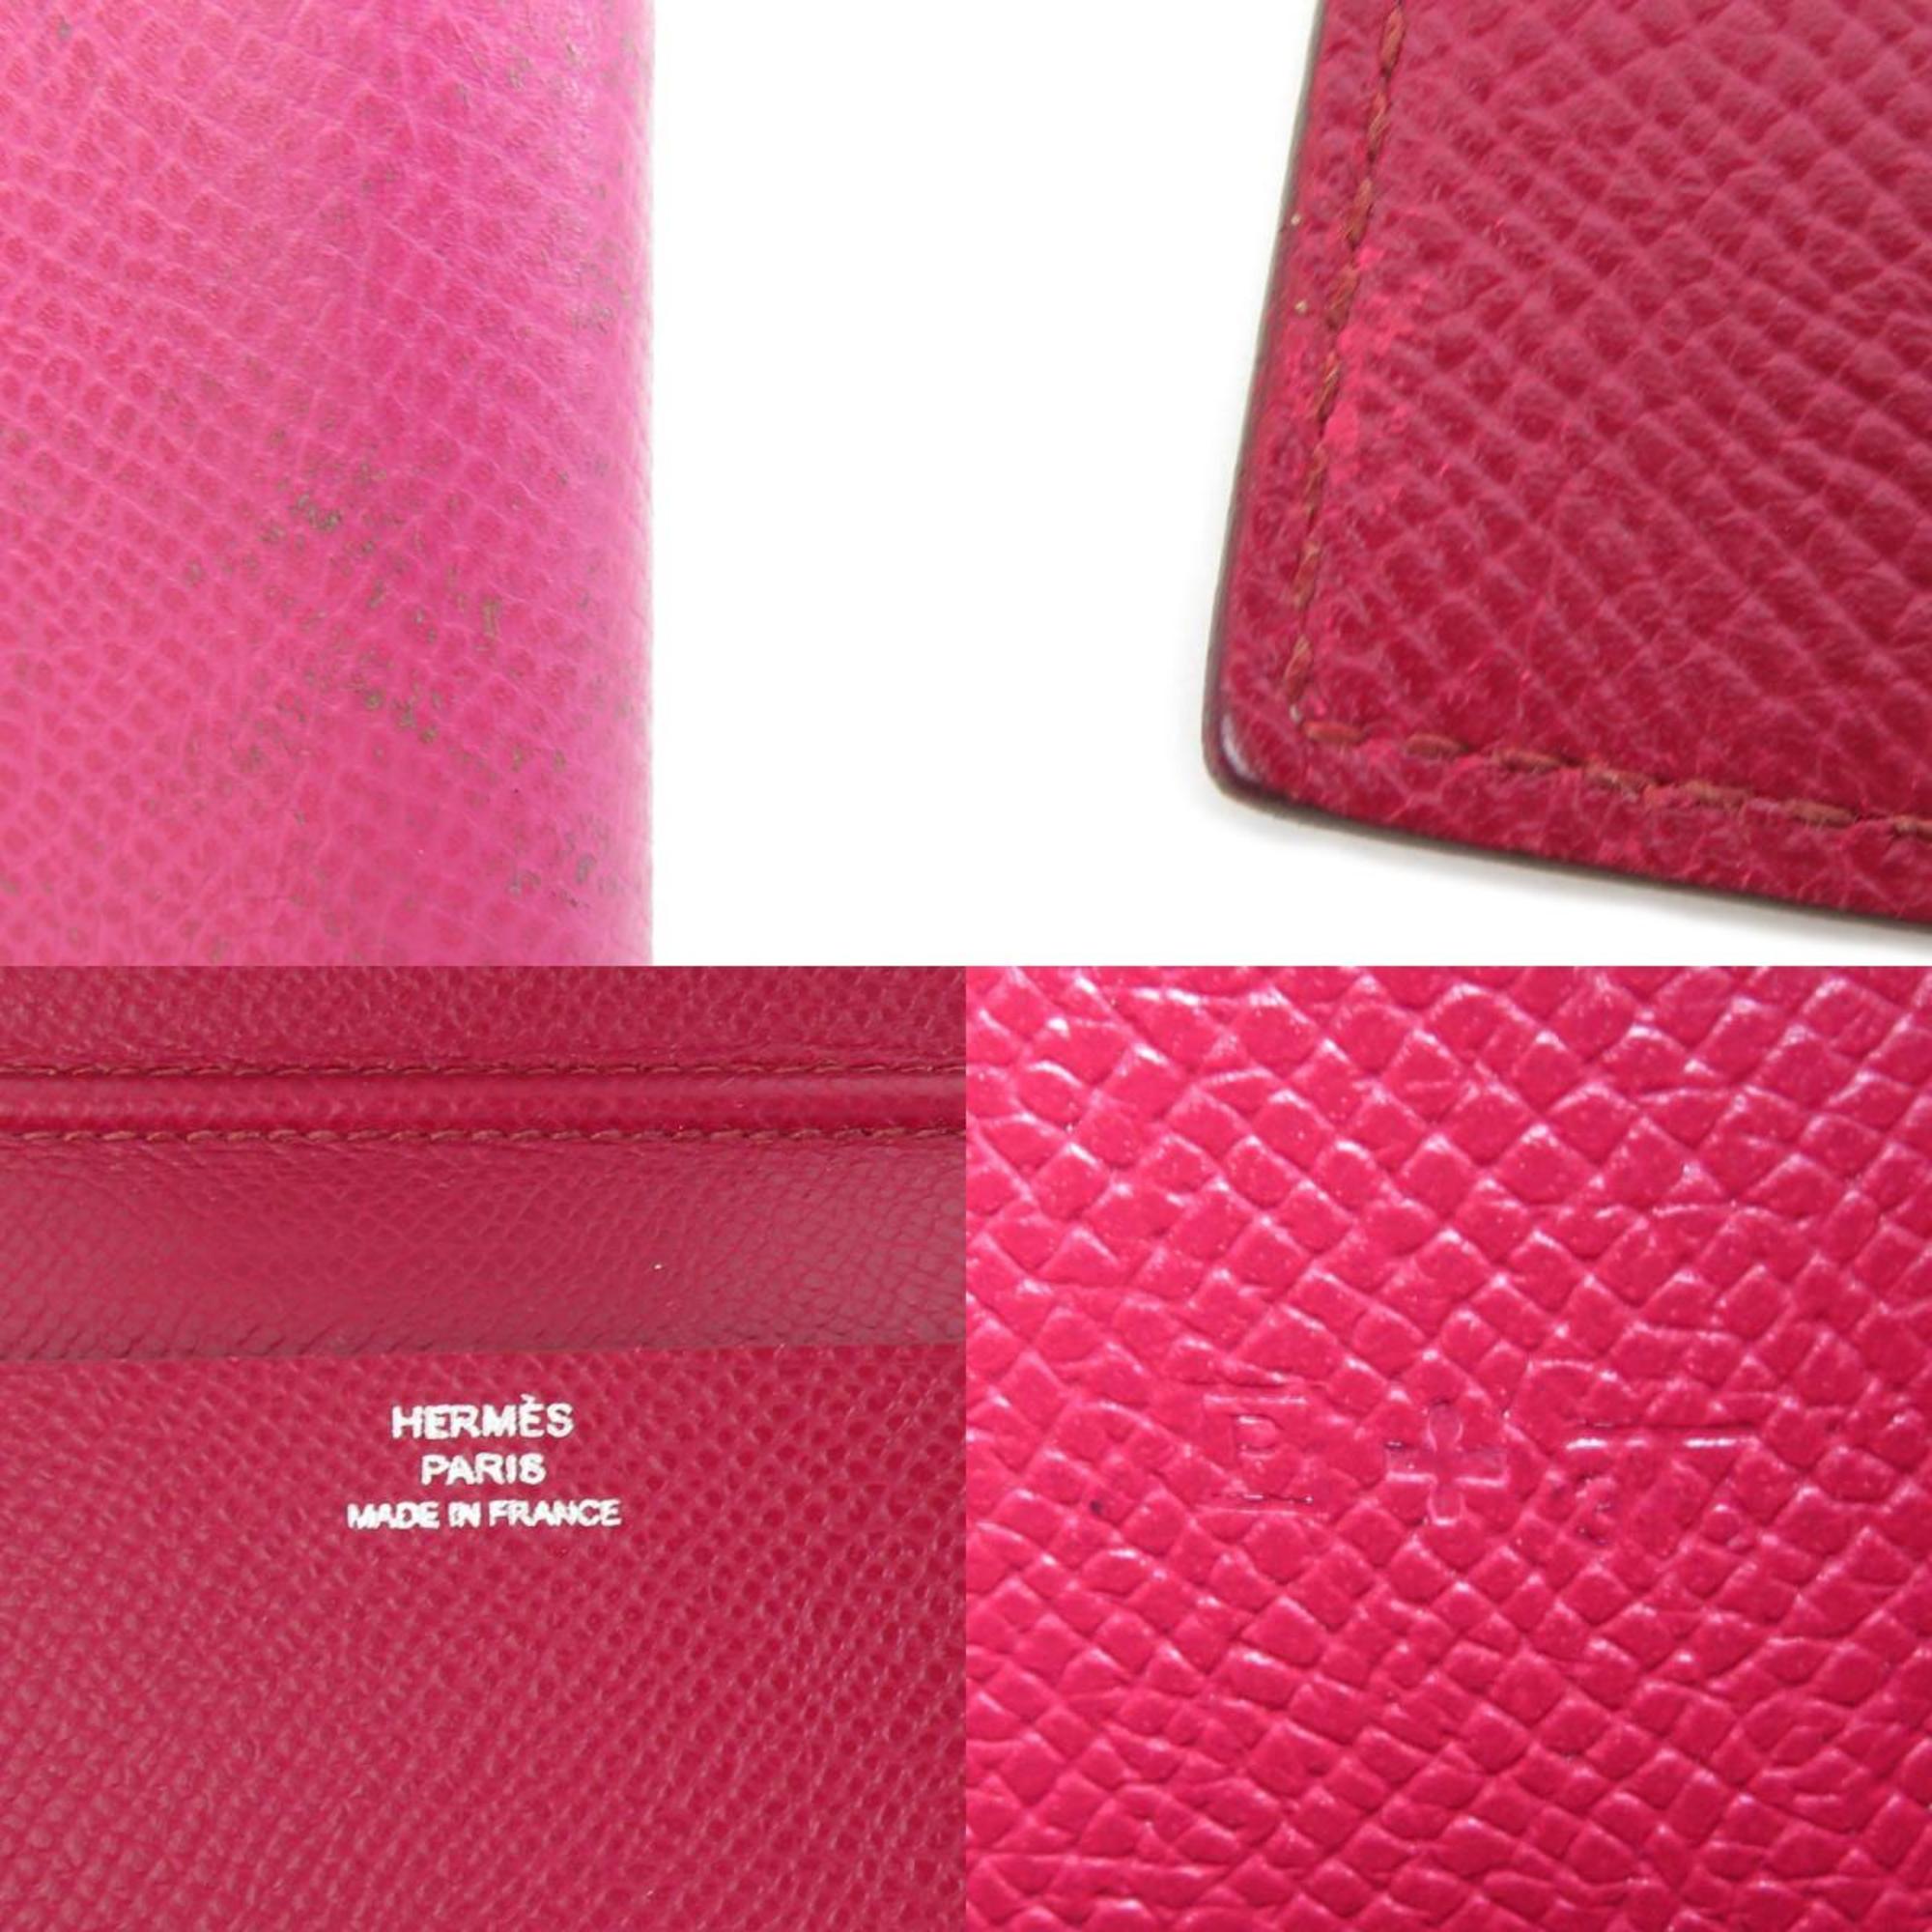 Hermes Notebook Cover Leather Pink/Bordeaux Ladies